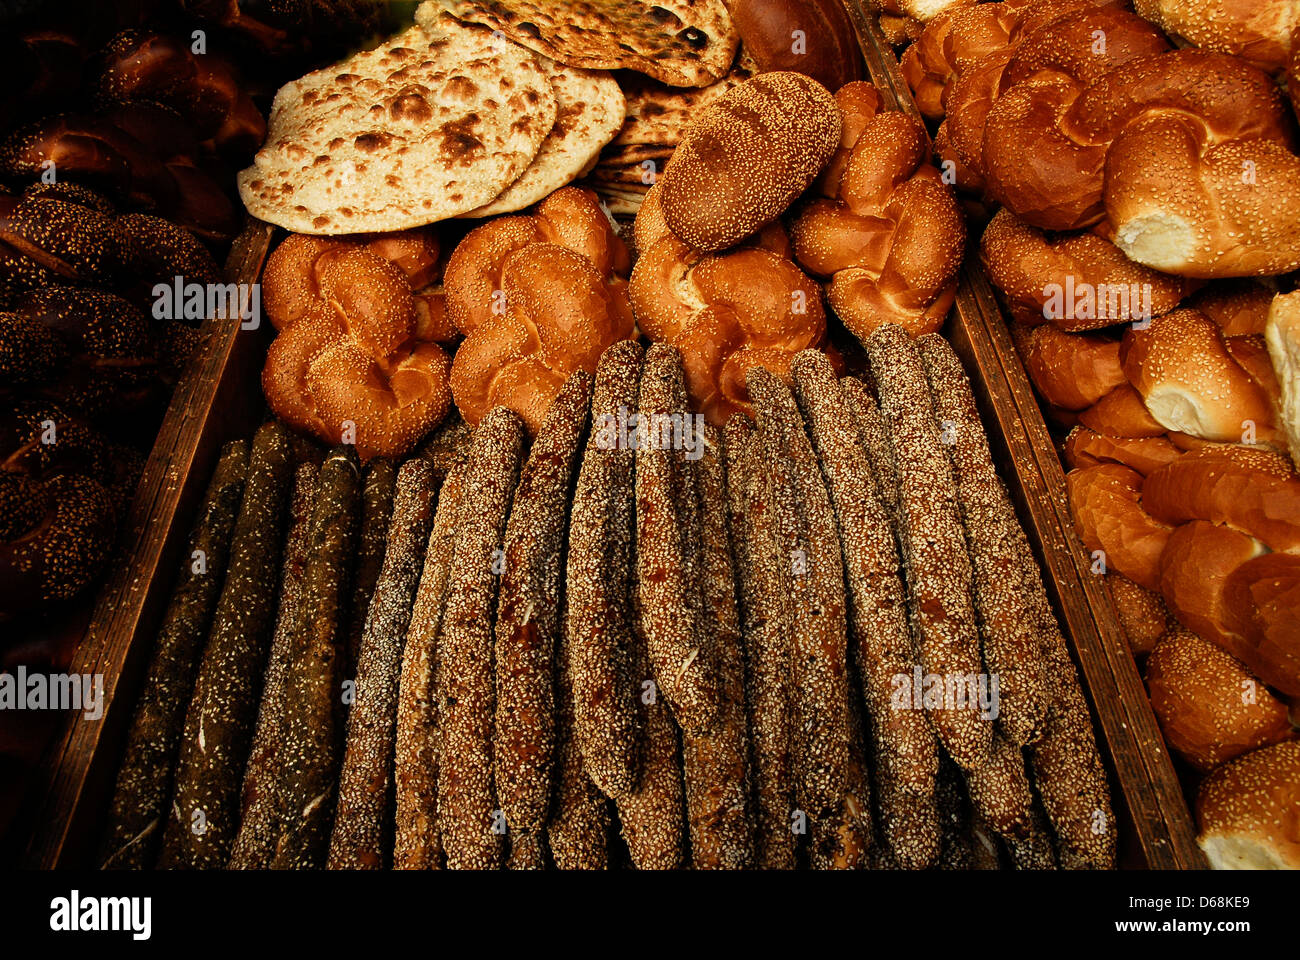 Variety of bread in a bakery Stock Photo